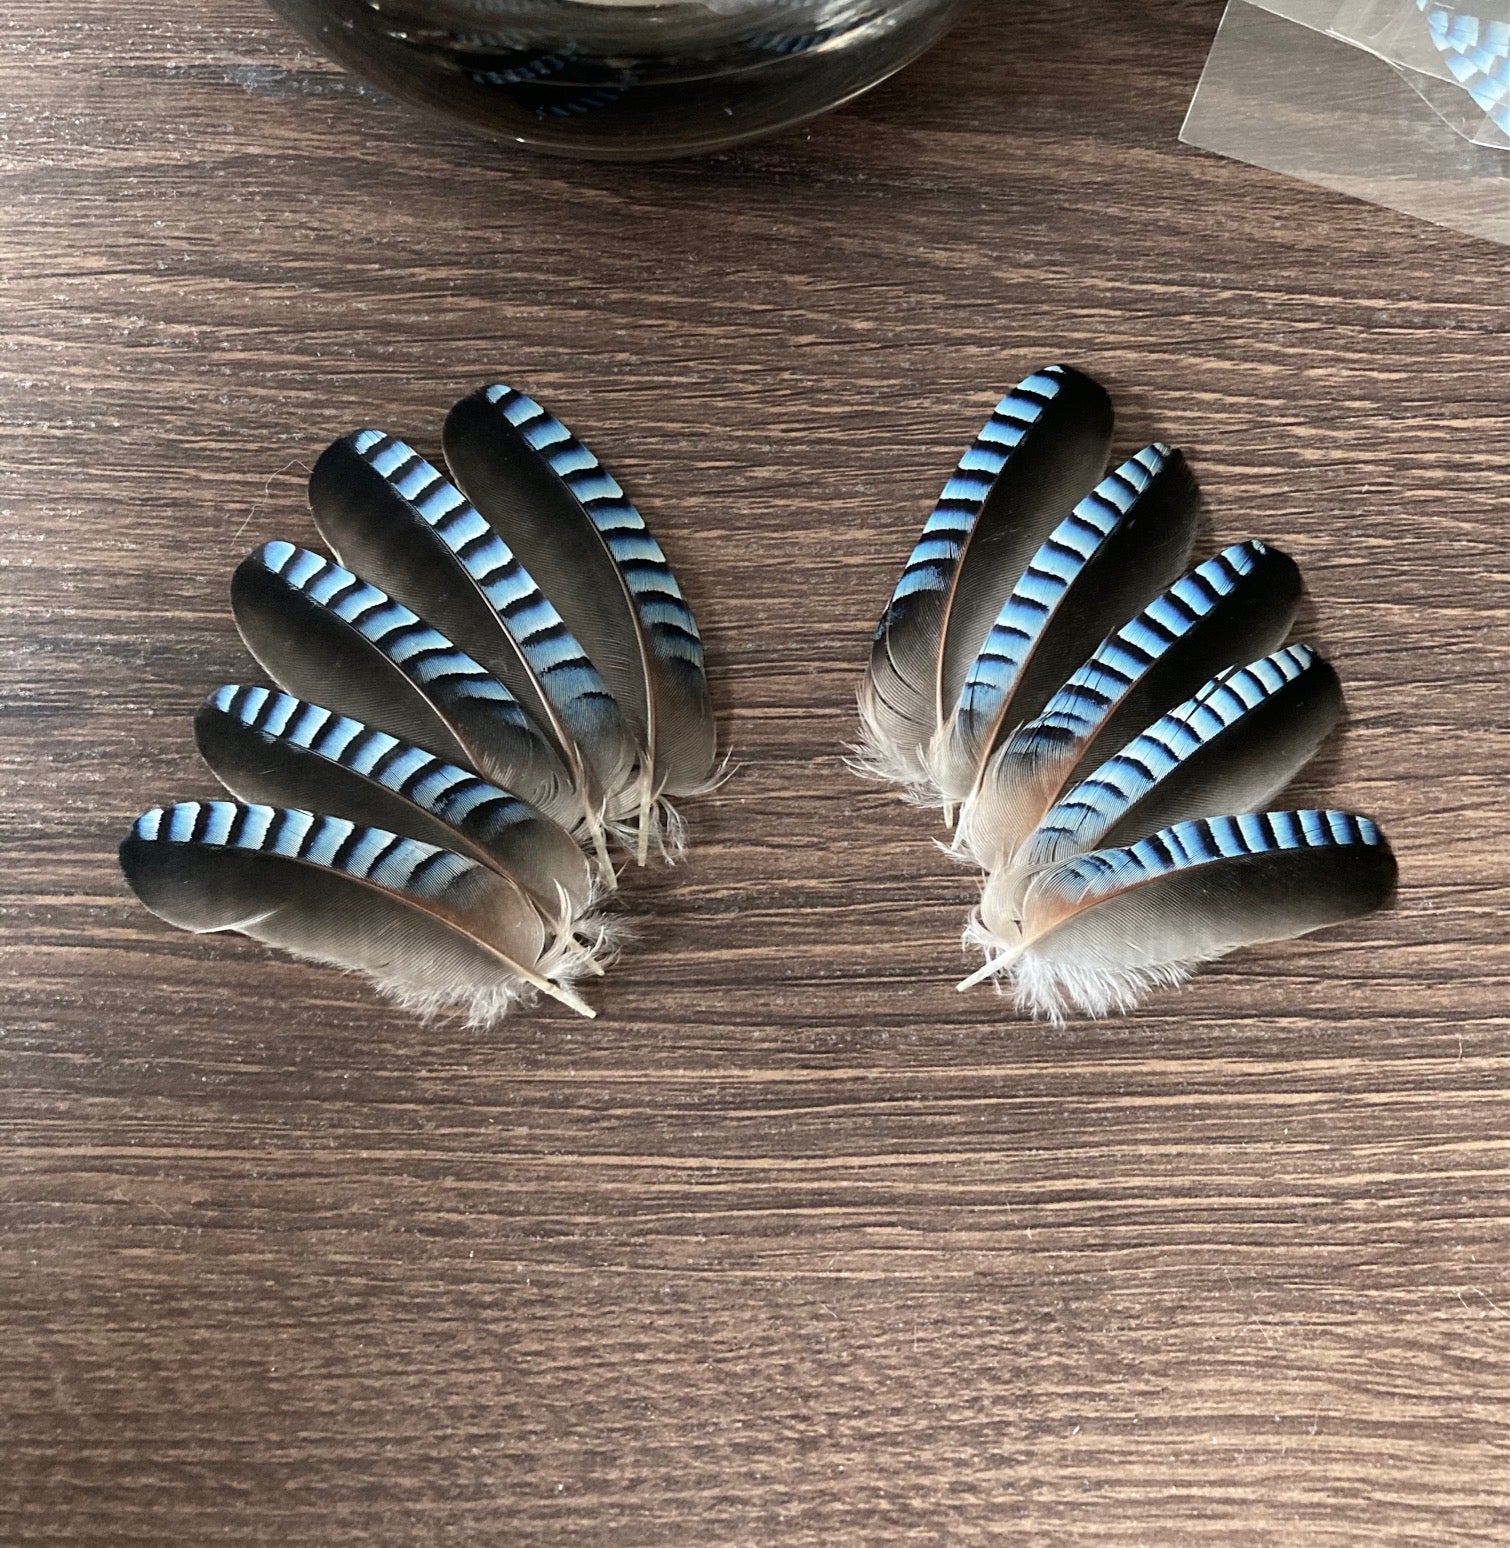 Jay Feather Earrings Men Small Feather Earrings Studs Feather Earrings  Hoops Blue Jay Earrings Men Jewelry Gift for Him Gift for Men Hoops - Etsy